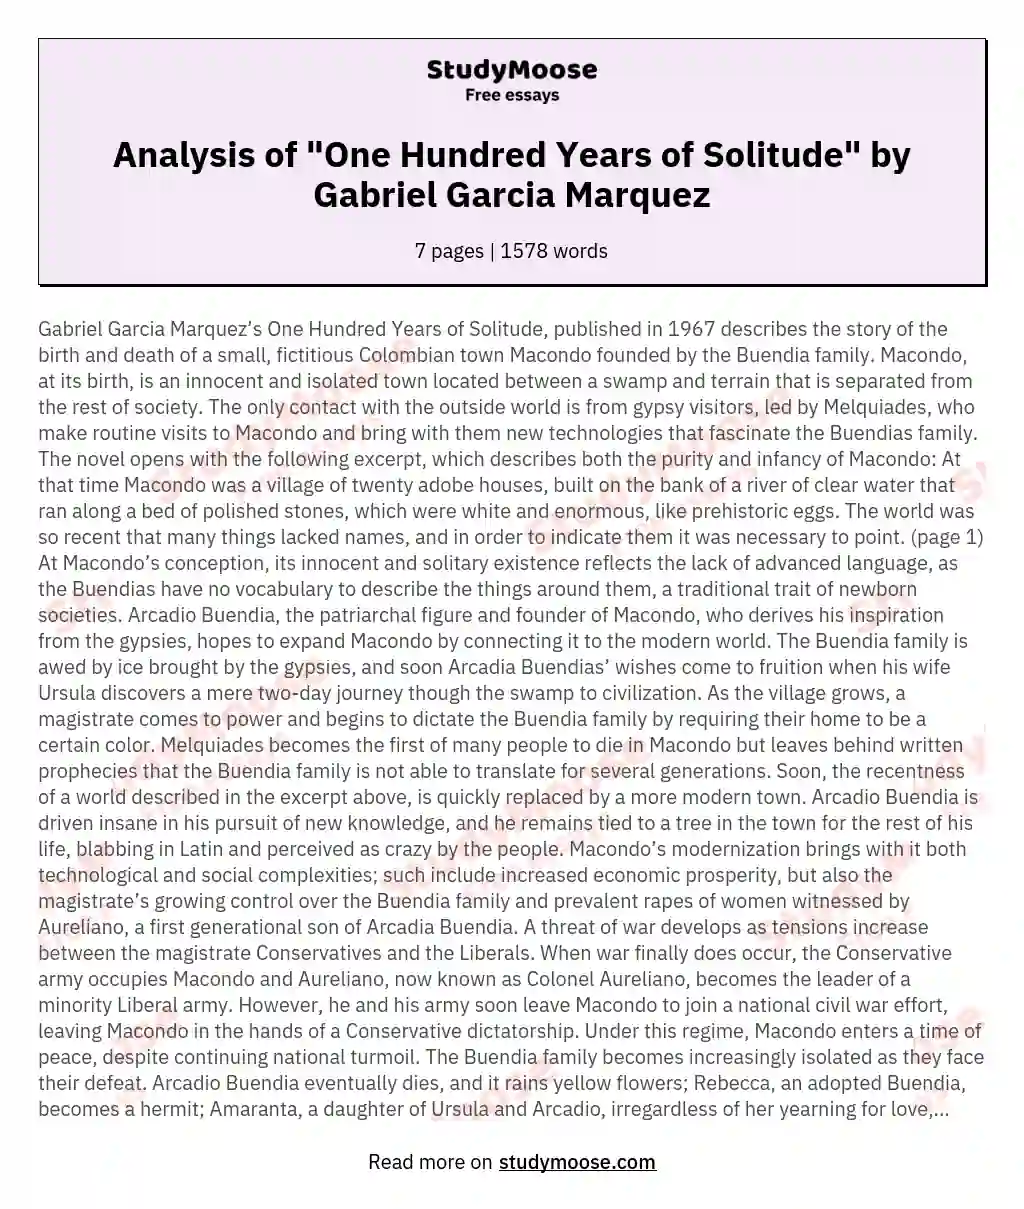 Analysis of "One Hundred Years of Solitude" by Gabriel Garcia Marquez